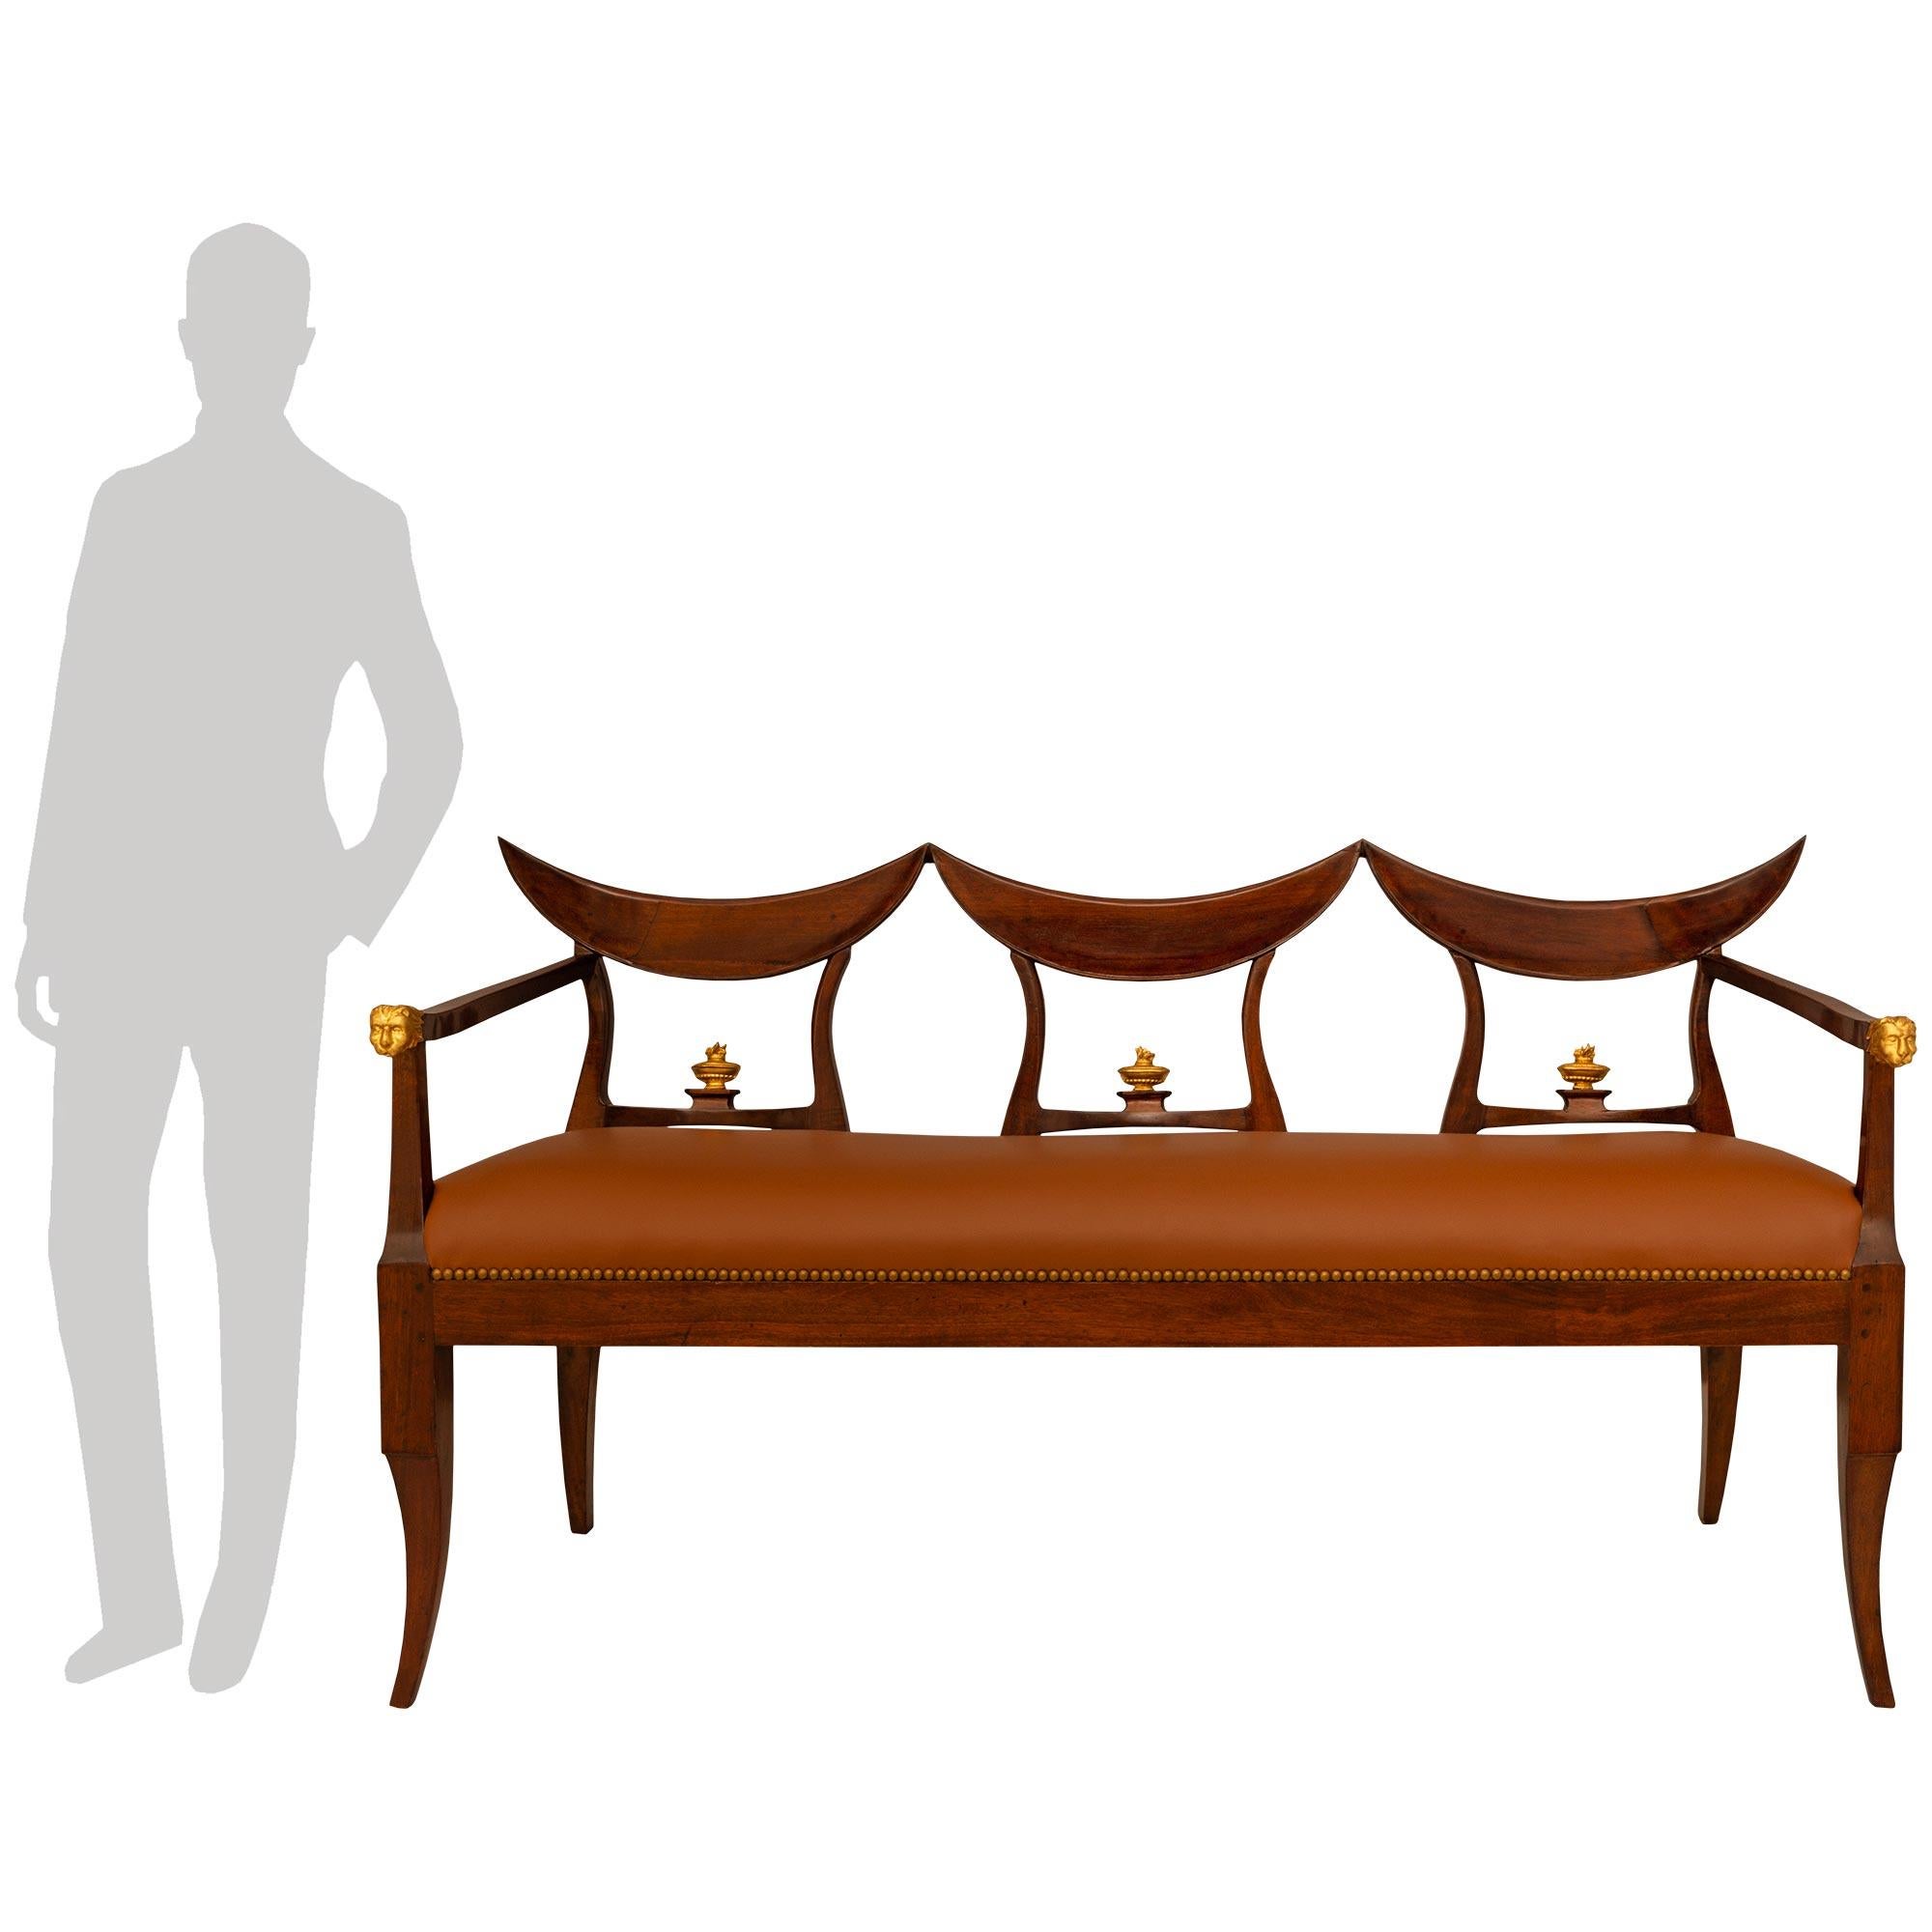 A handsome and unique pair of Italian 18th century Neo-Classical st. Walnut and Giltwood benches from Tuscany. Each three seat bench is raised by four square cabriole legs with the front legs displaying a lovely taper. The front legs lead into the